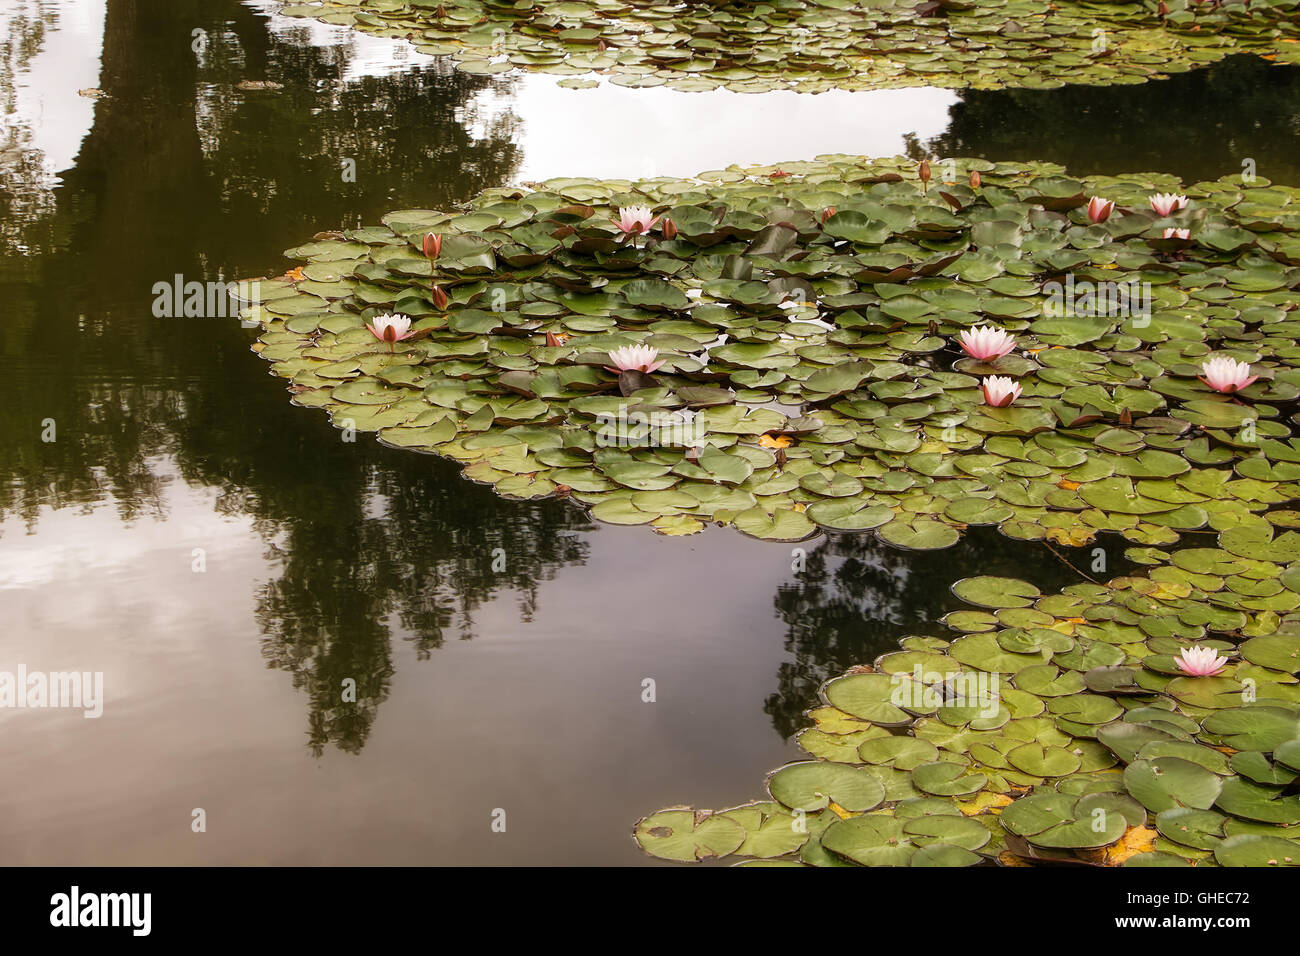 Water lily or pond lily on small country lake with beautiful reflection of surrounding trees Stock Photo